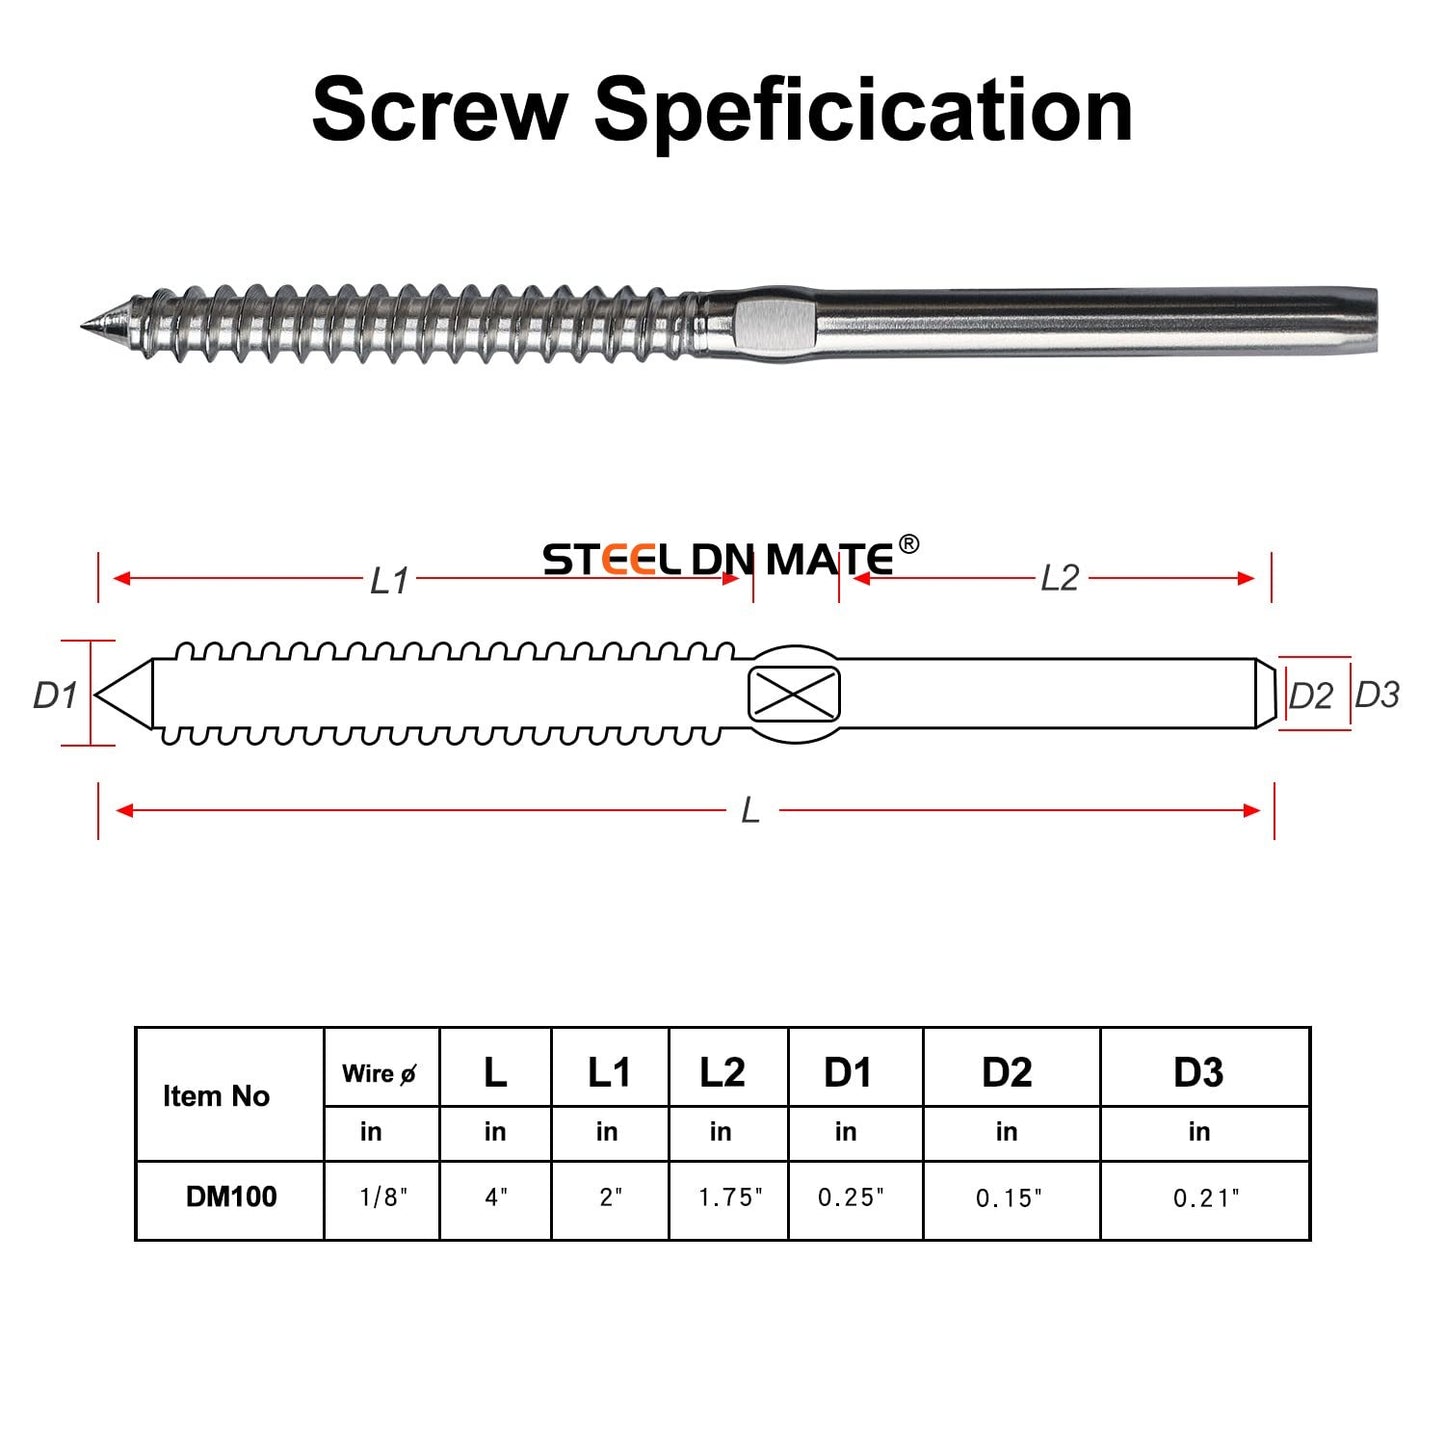 Steel DN Mate 120 Pack T316 Stainless Steel Left&Right Handed Thread Swage Lag Screws for Wood Post of 1/8" Deck Railing Kit, Cable Railing Hardware, DIY Baluster Hardware, Wrench Included DM60